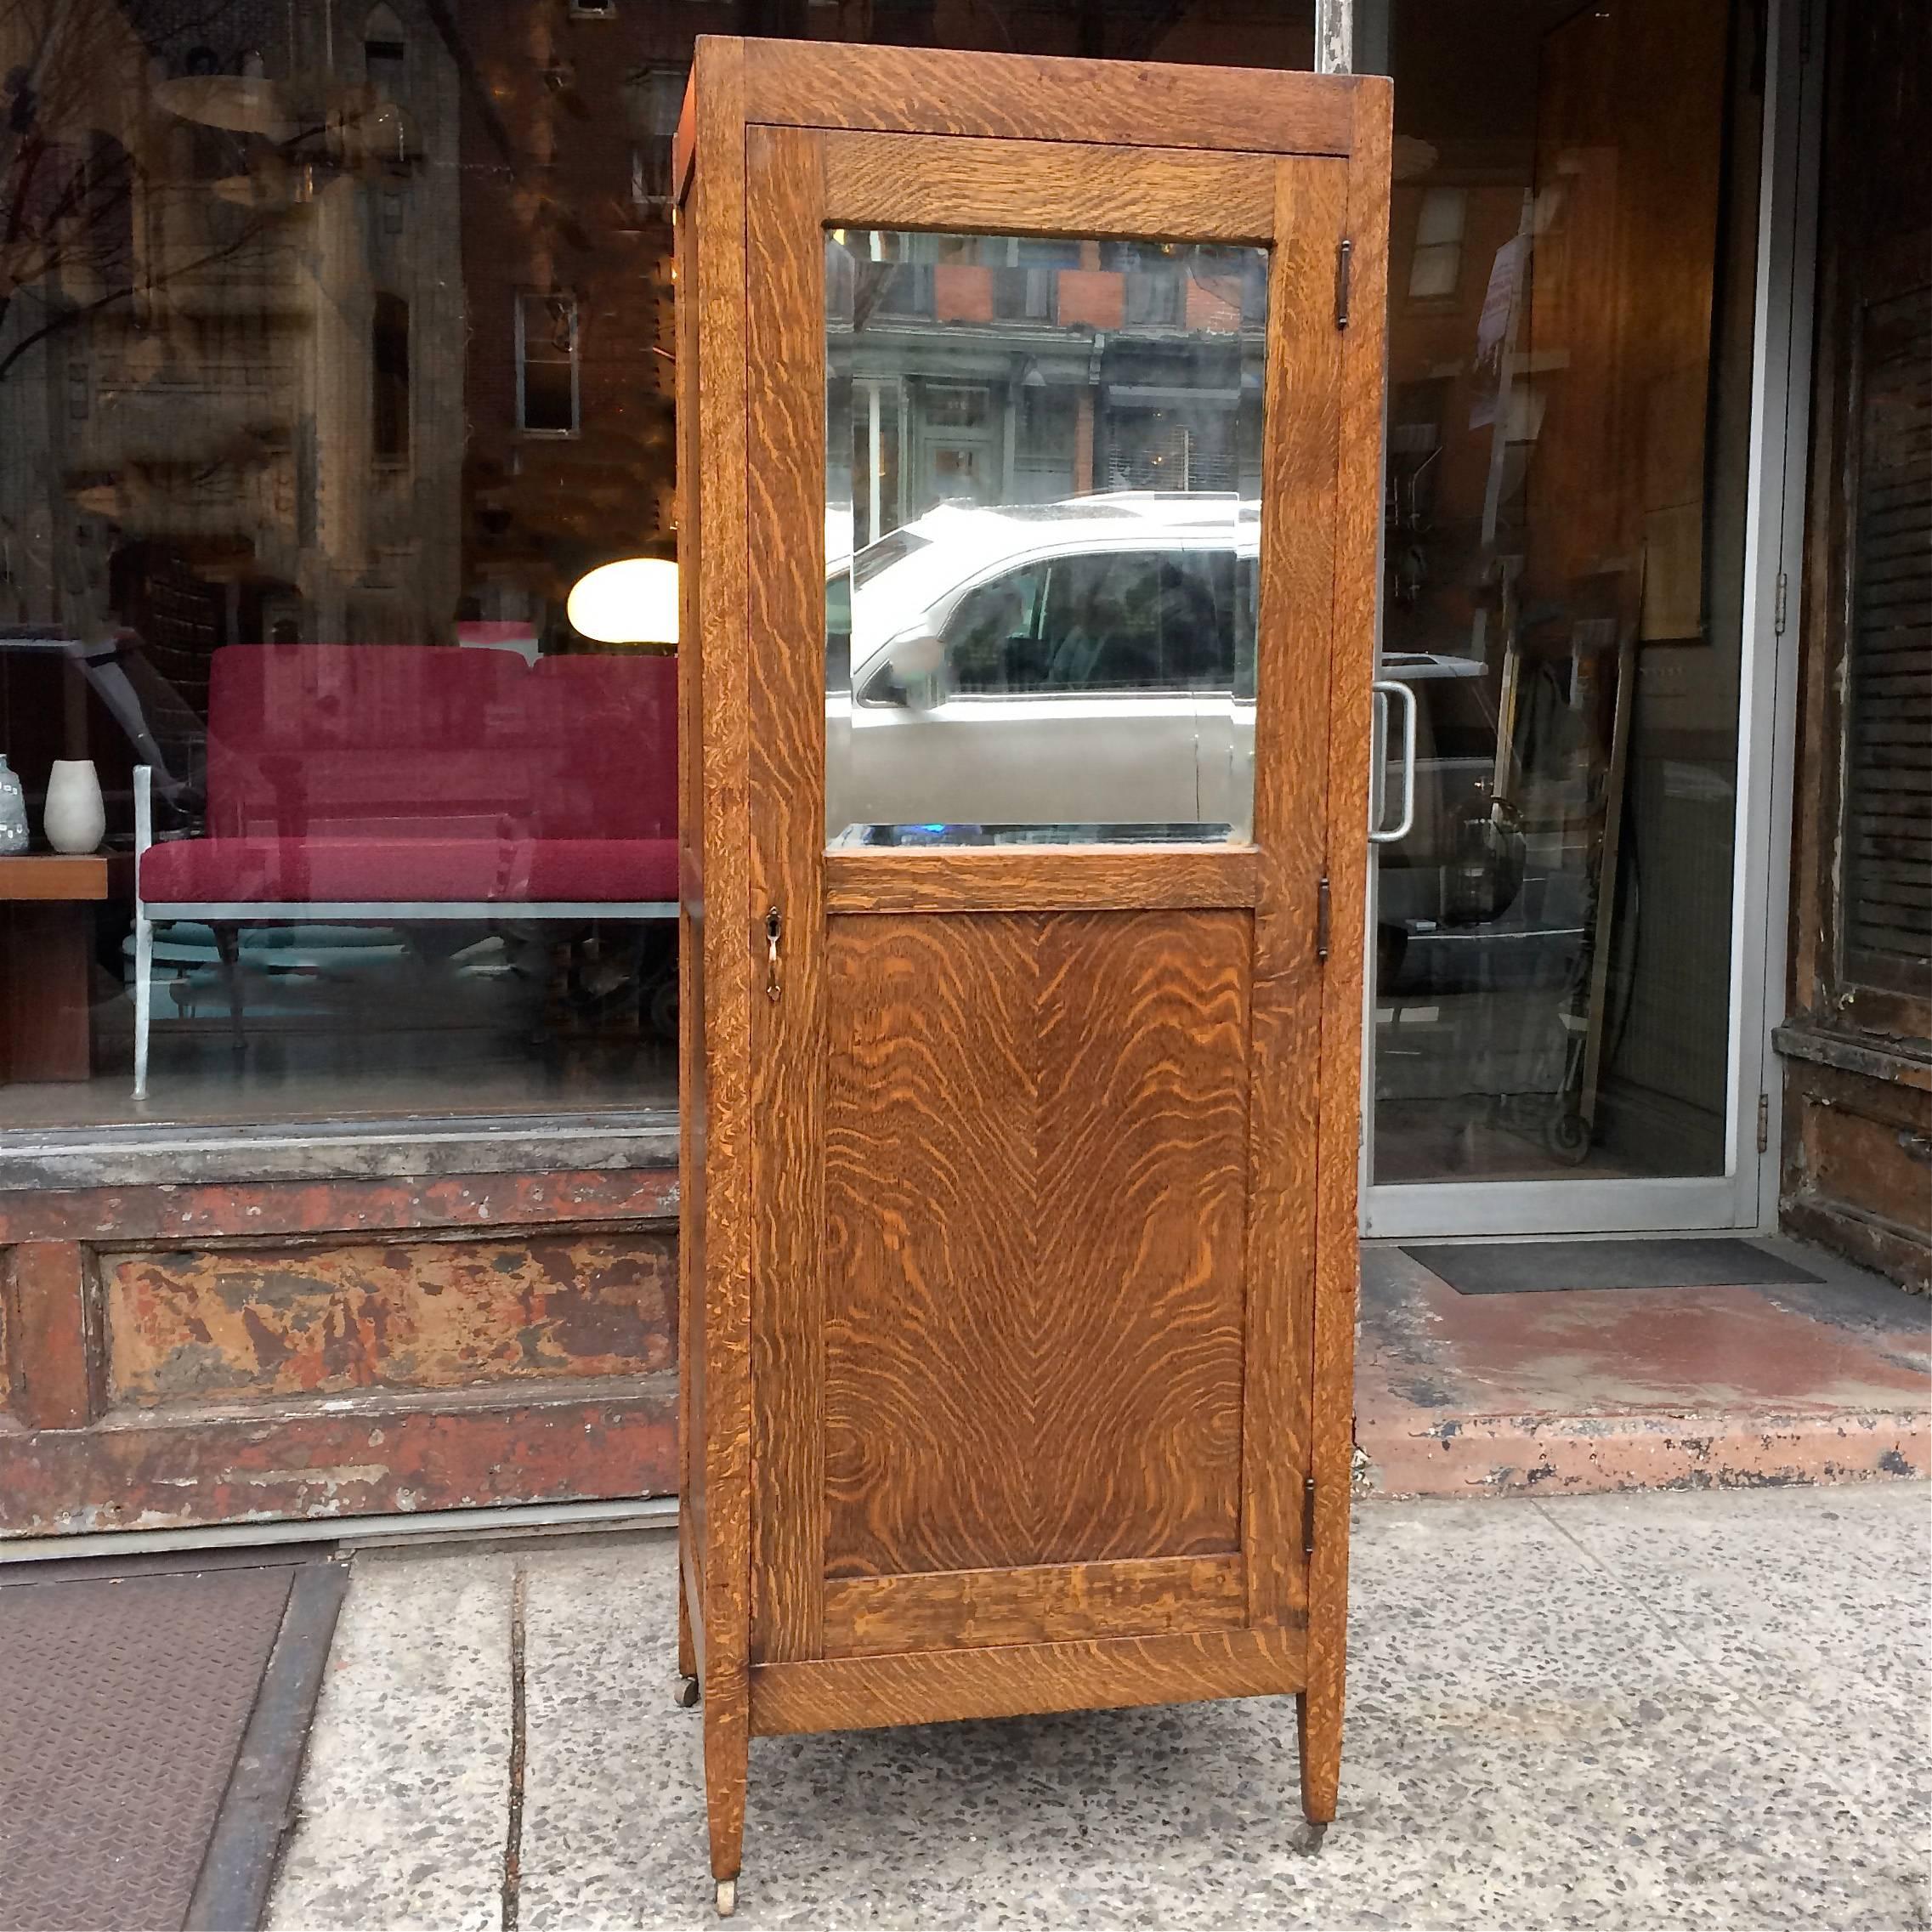 1920s, Art and crafts armoire is quarter sawn oak with a beveled mirror front panel. The open interior space measures 24.5 inches W x 18.5 inches D x 64.5 inches height with a retractable rail for hanging clothes.